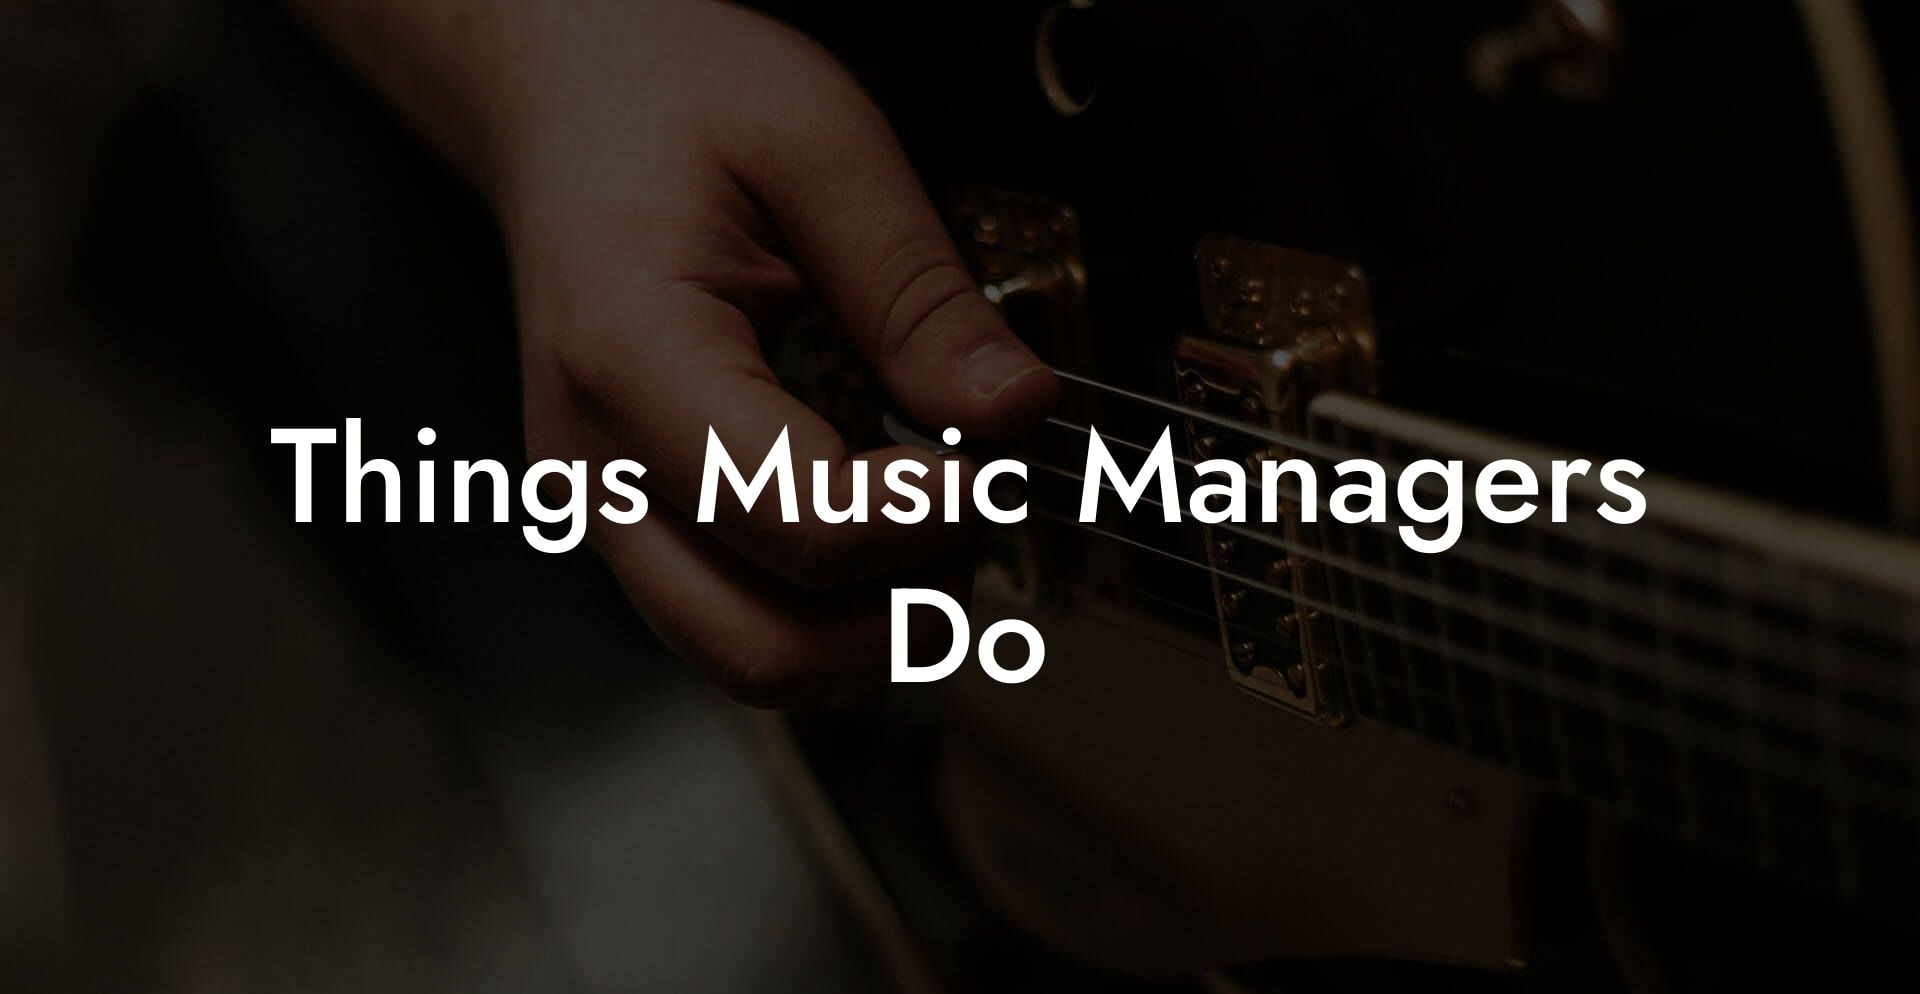 Things Music Managers Do